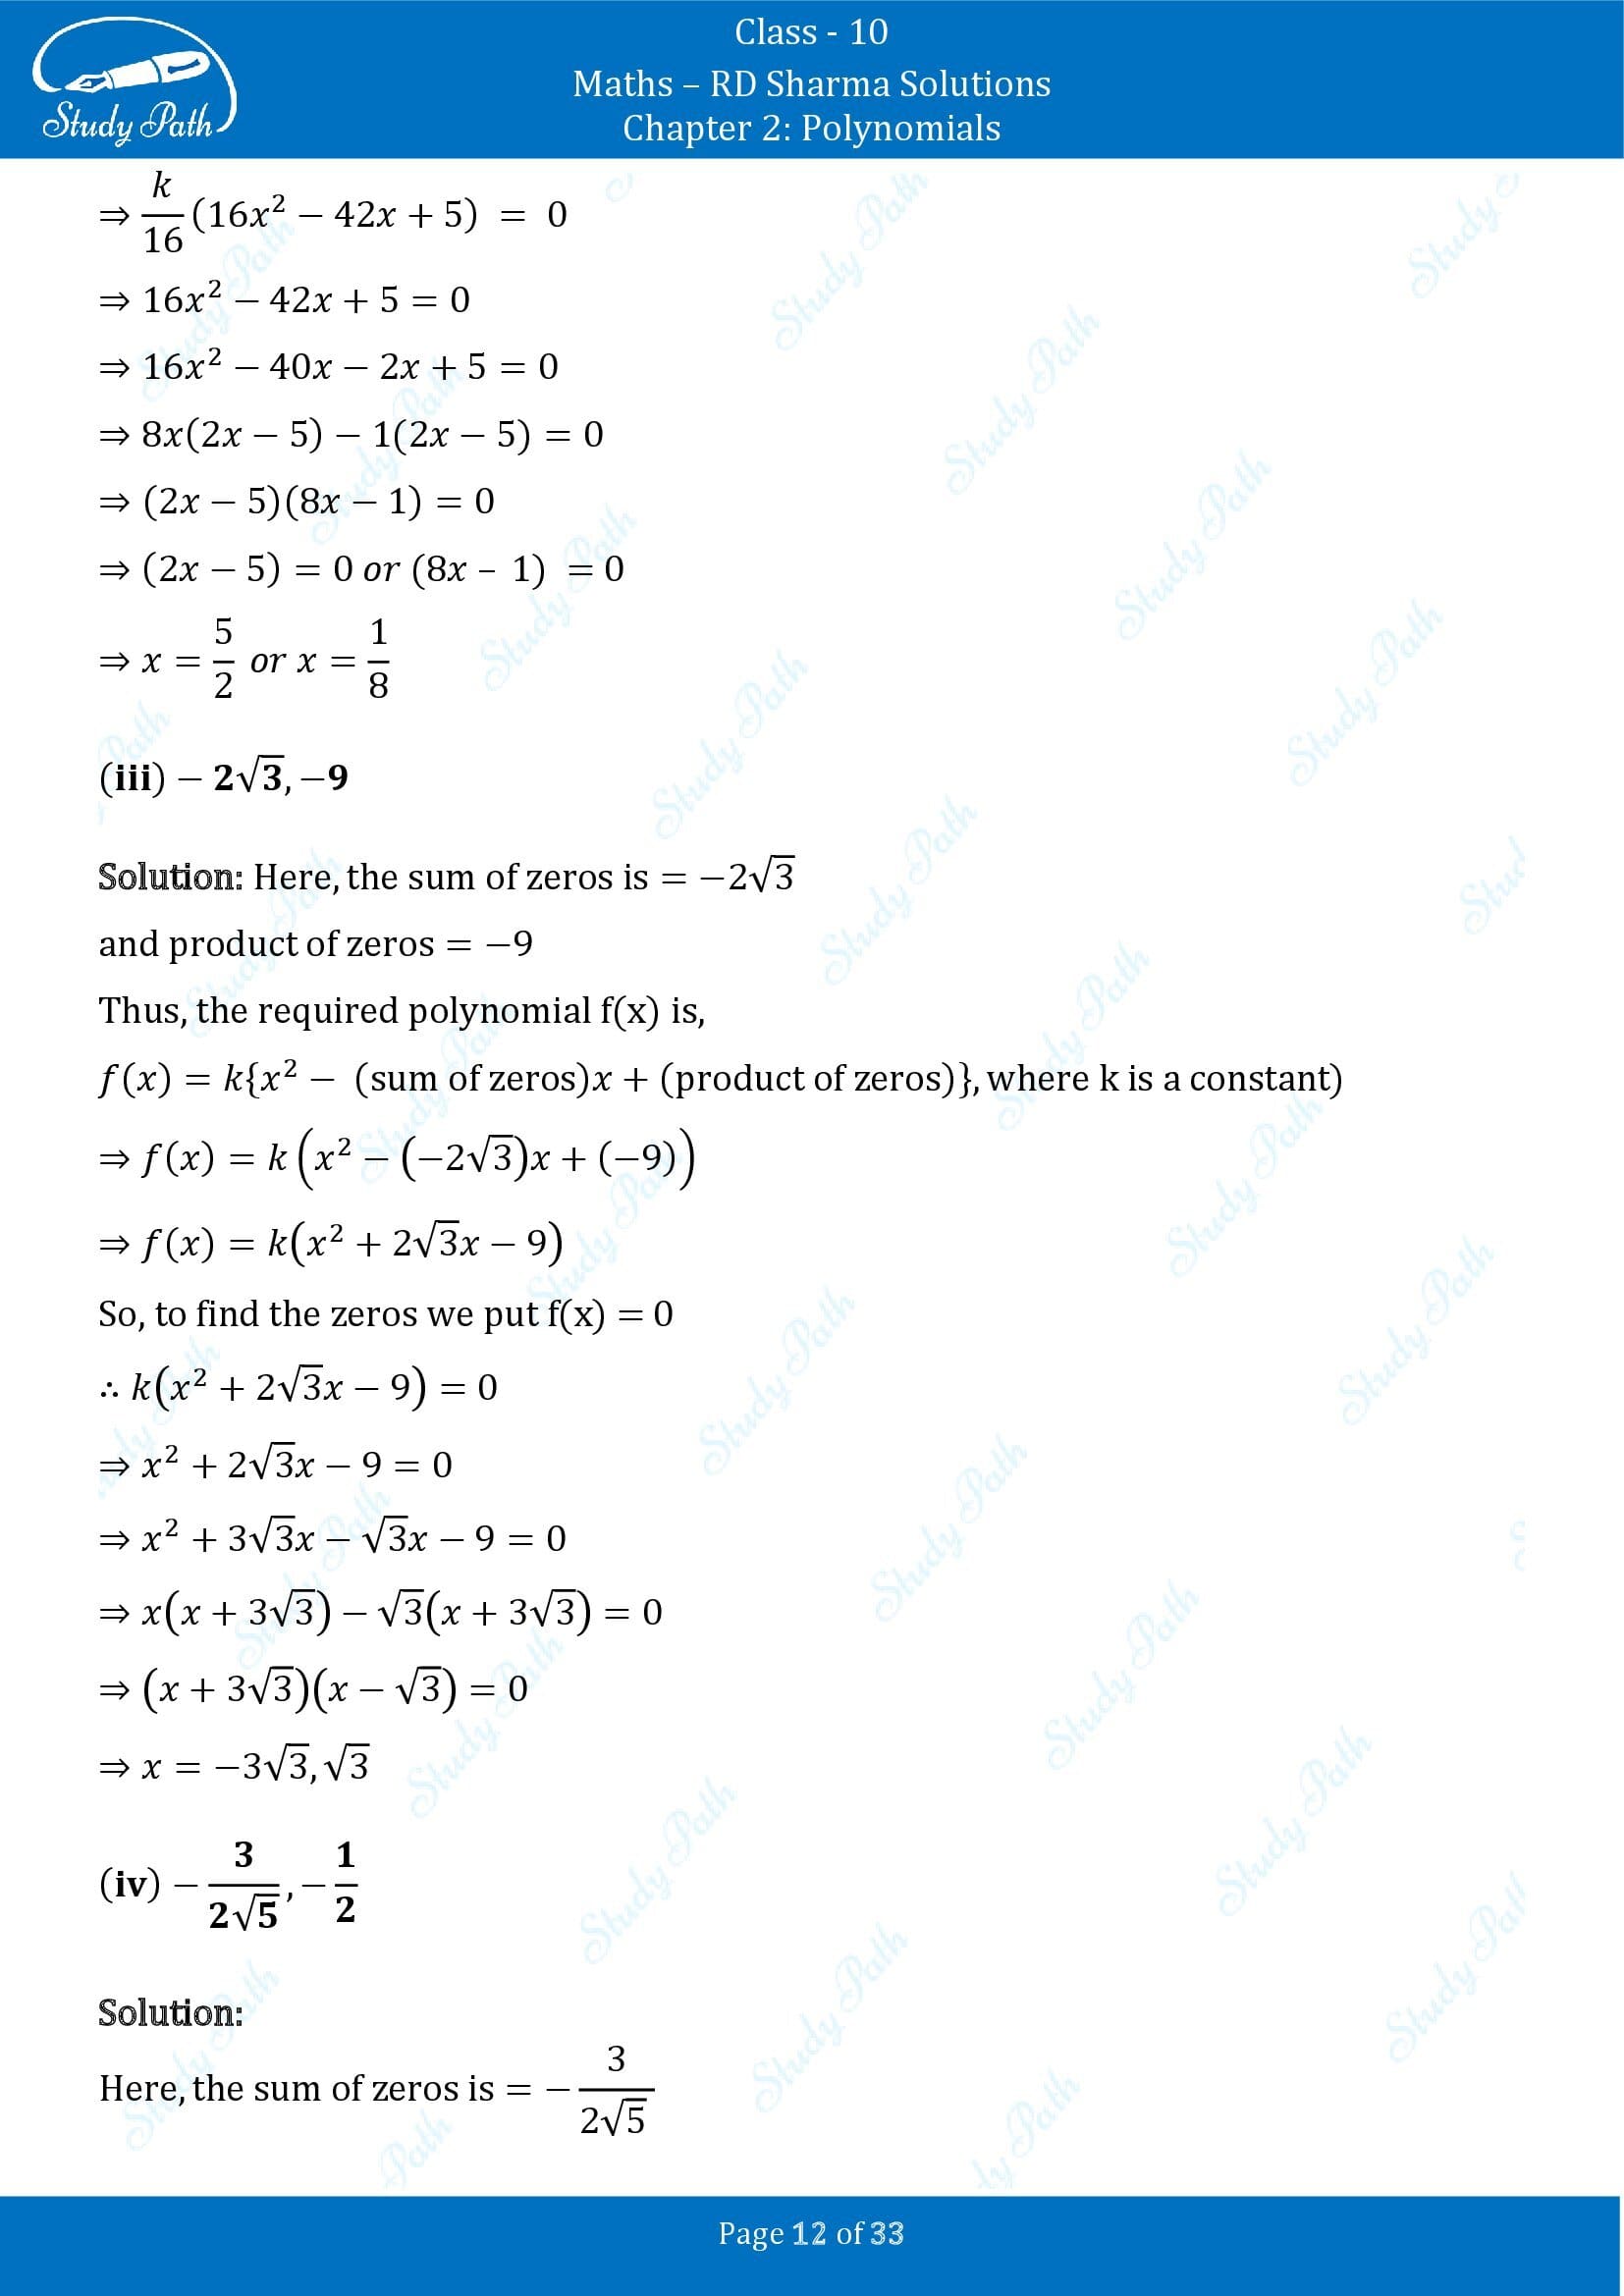 RD Sharma Solutions Class 10 Chapter 2 Polynomials Exercise 2.1 00012